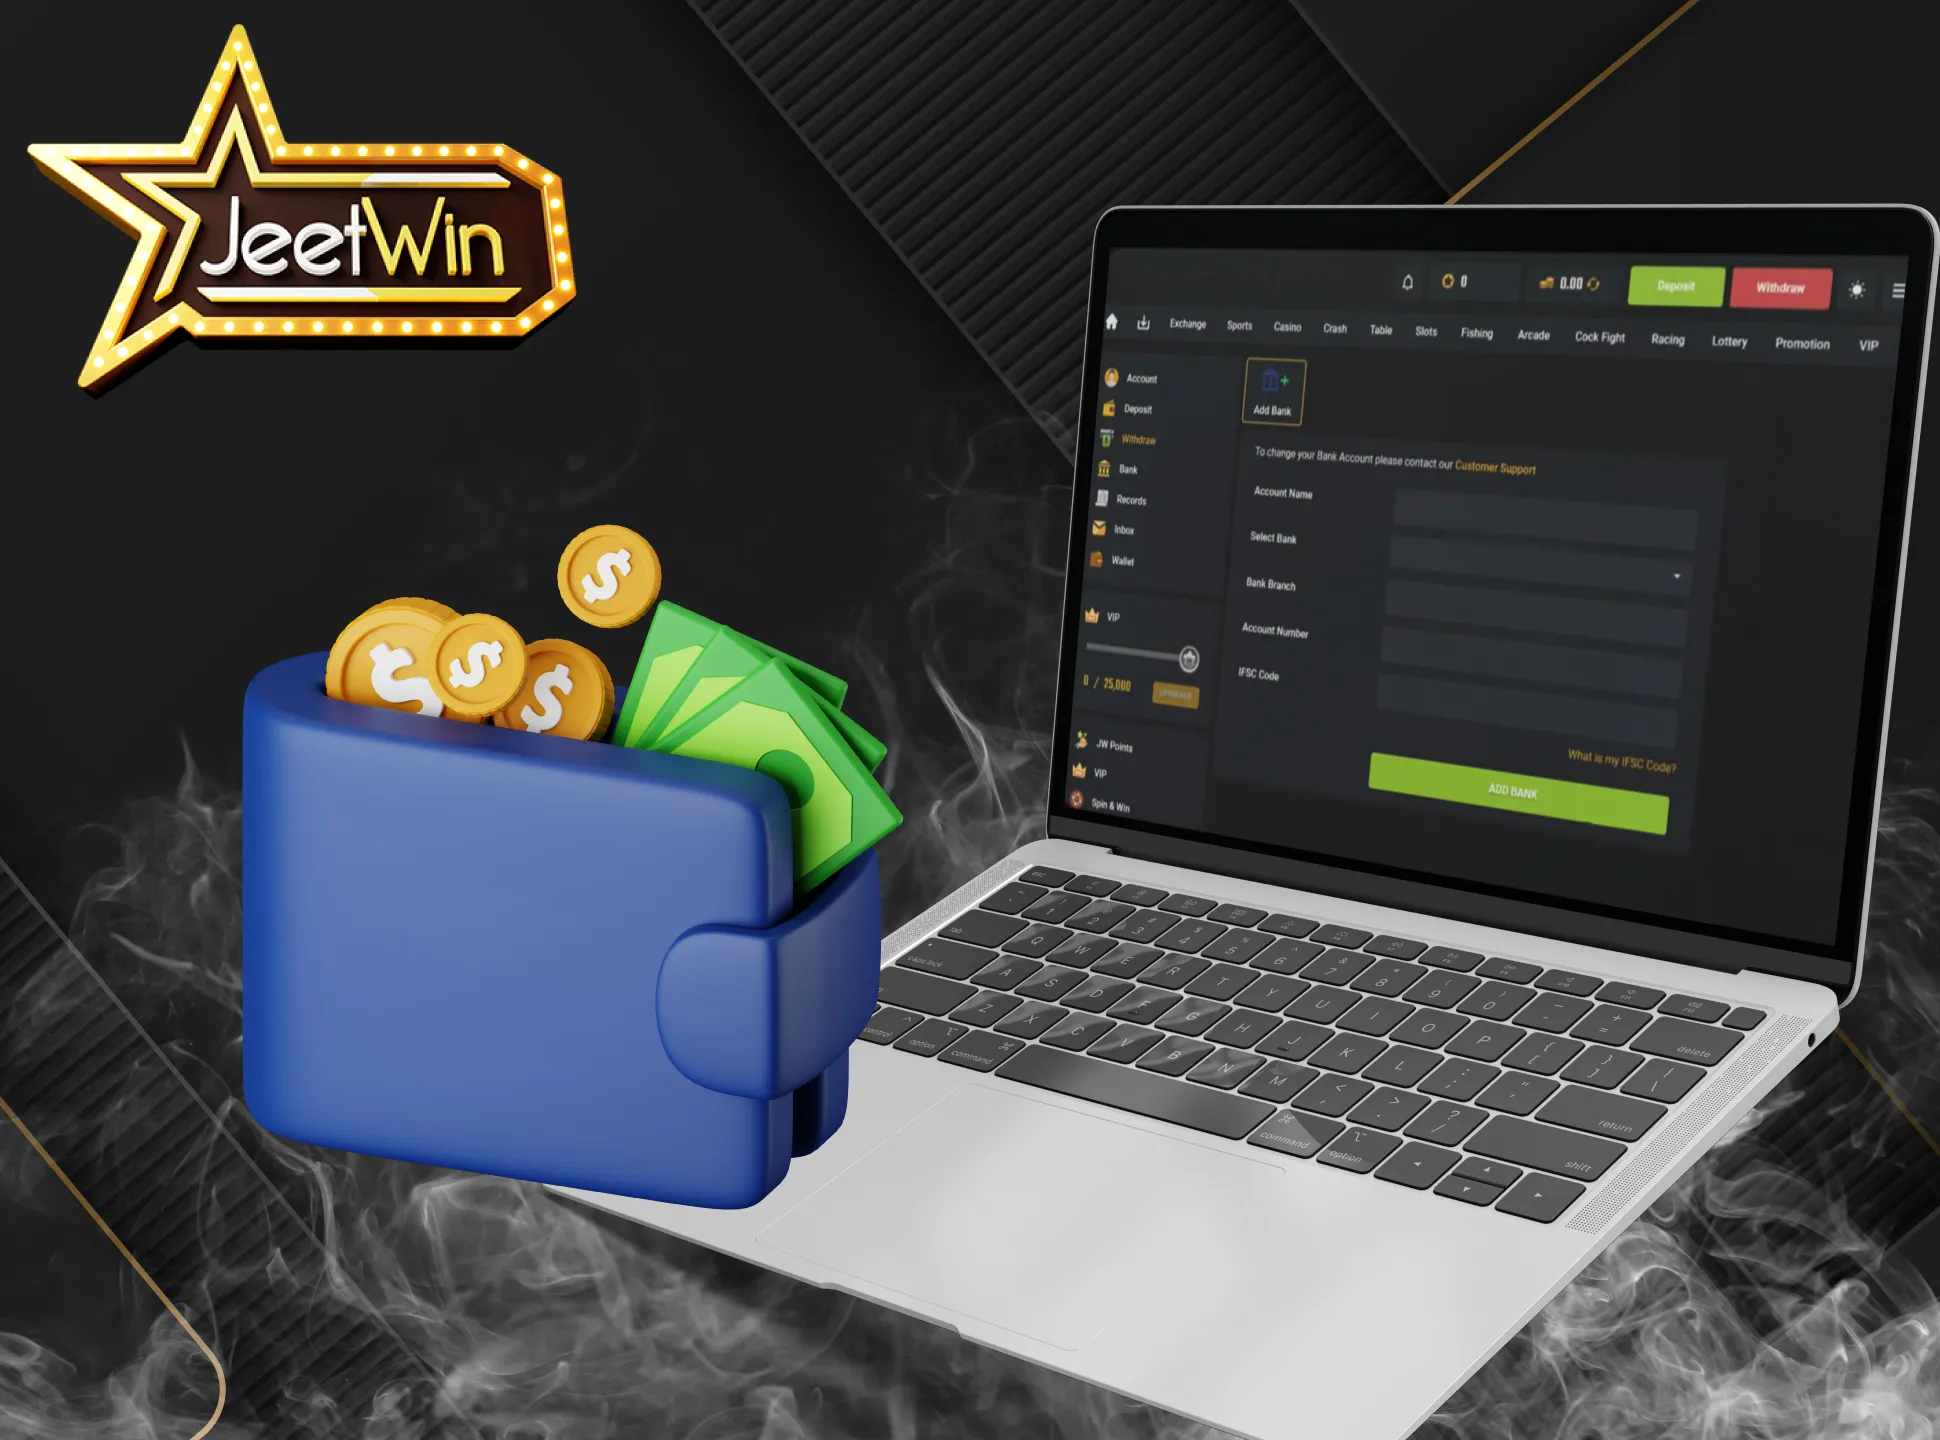 JeetWin website has implemented an easy and secure deposit system.